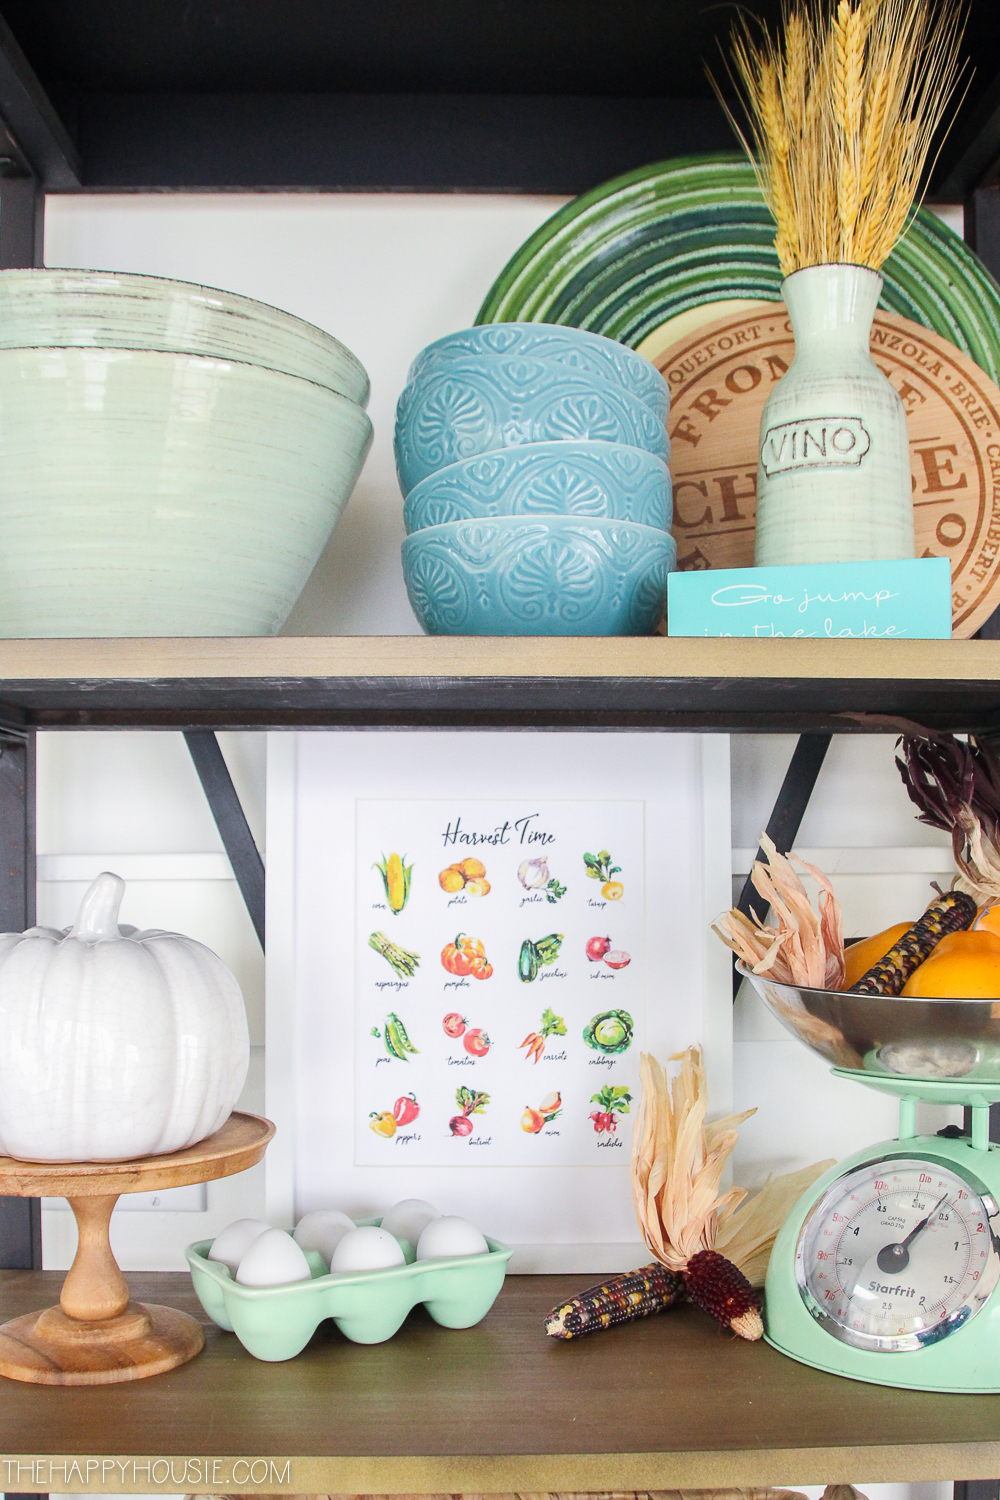 Harvest Time printable is on the shelf.